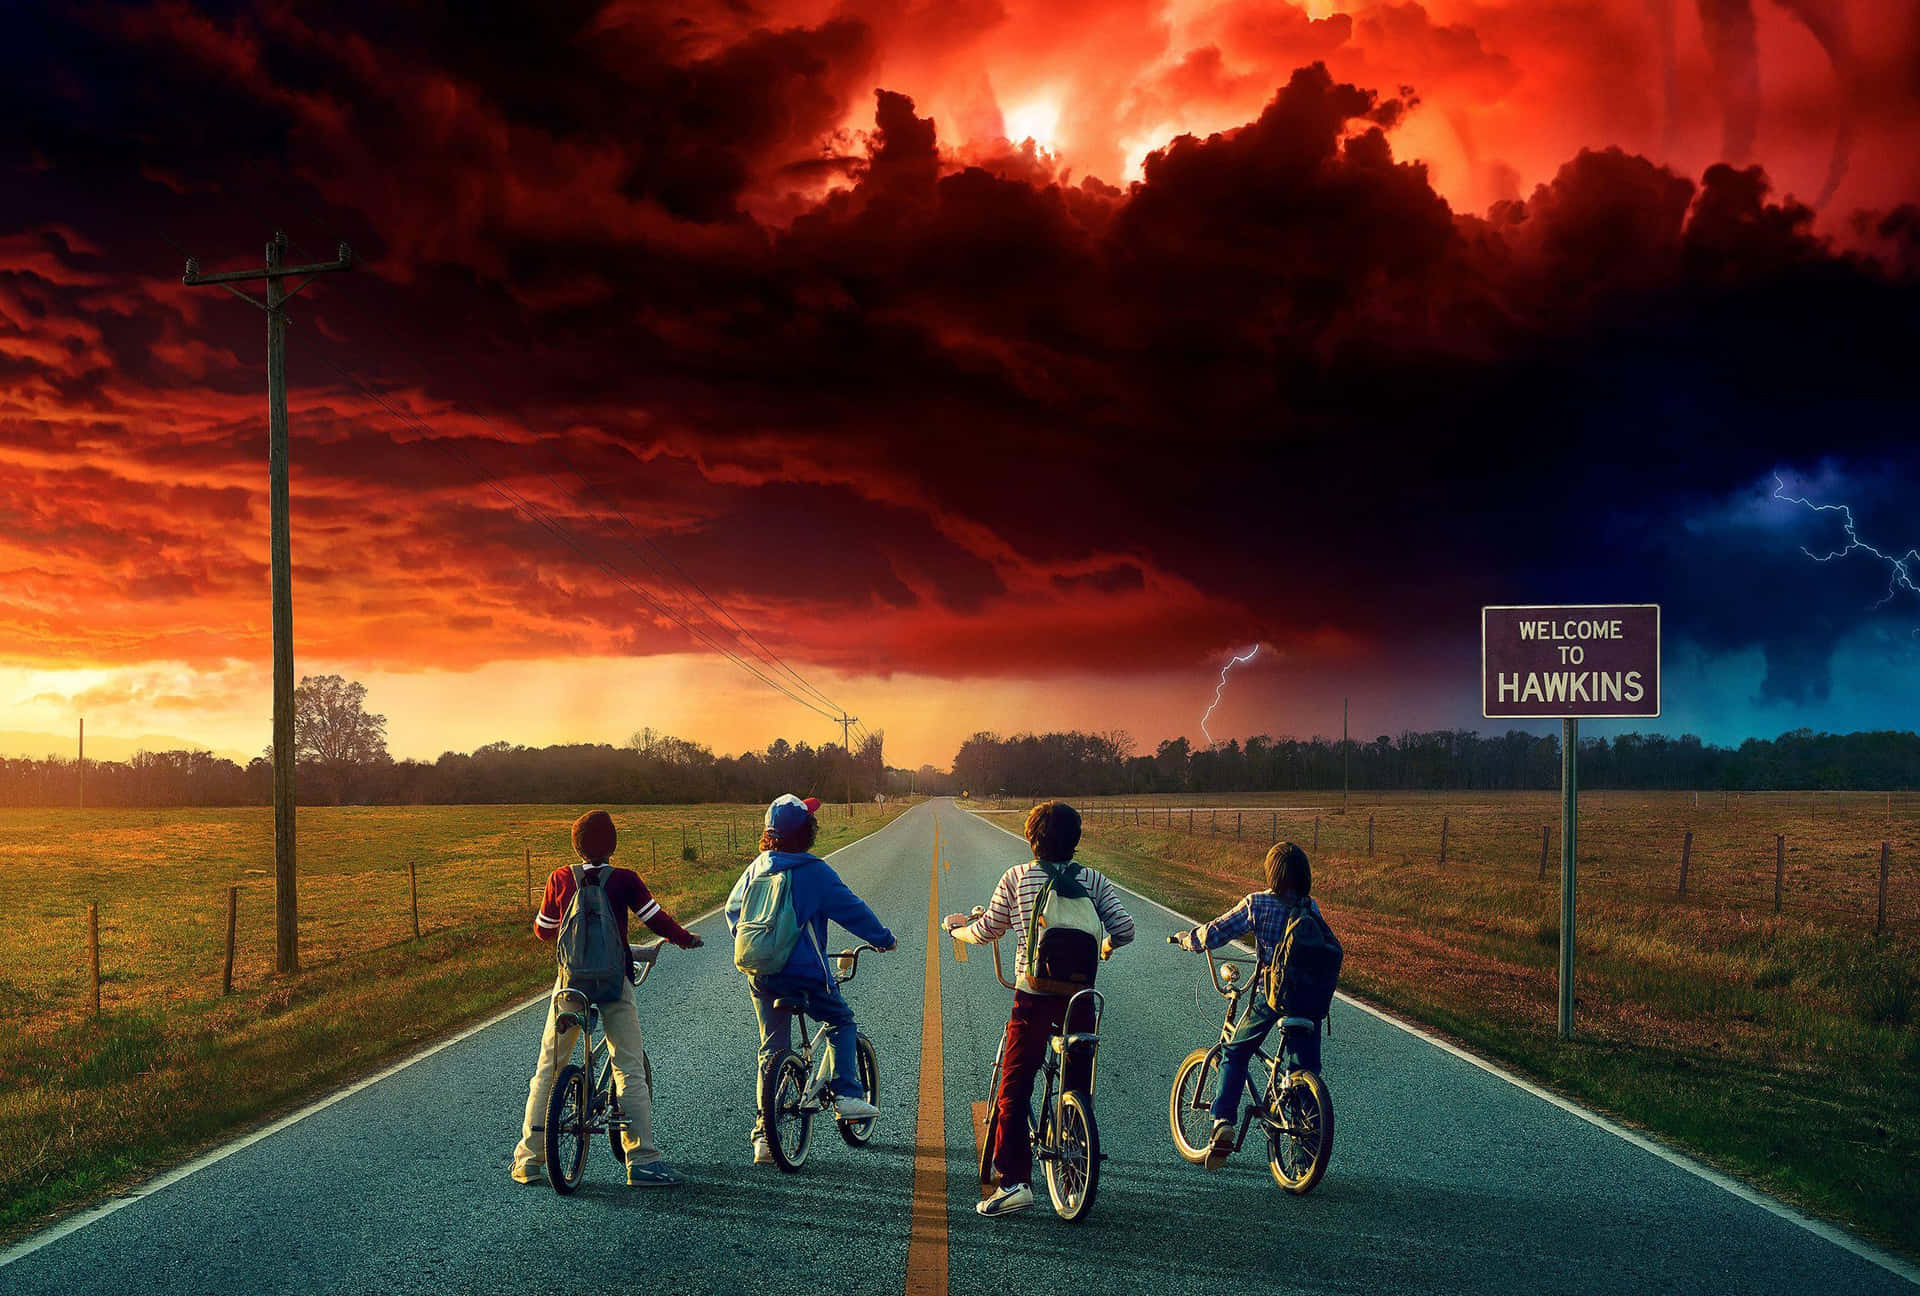 Uncover the mysteries of Stranger Things